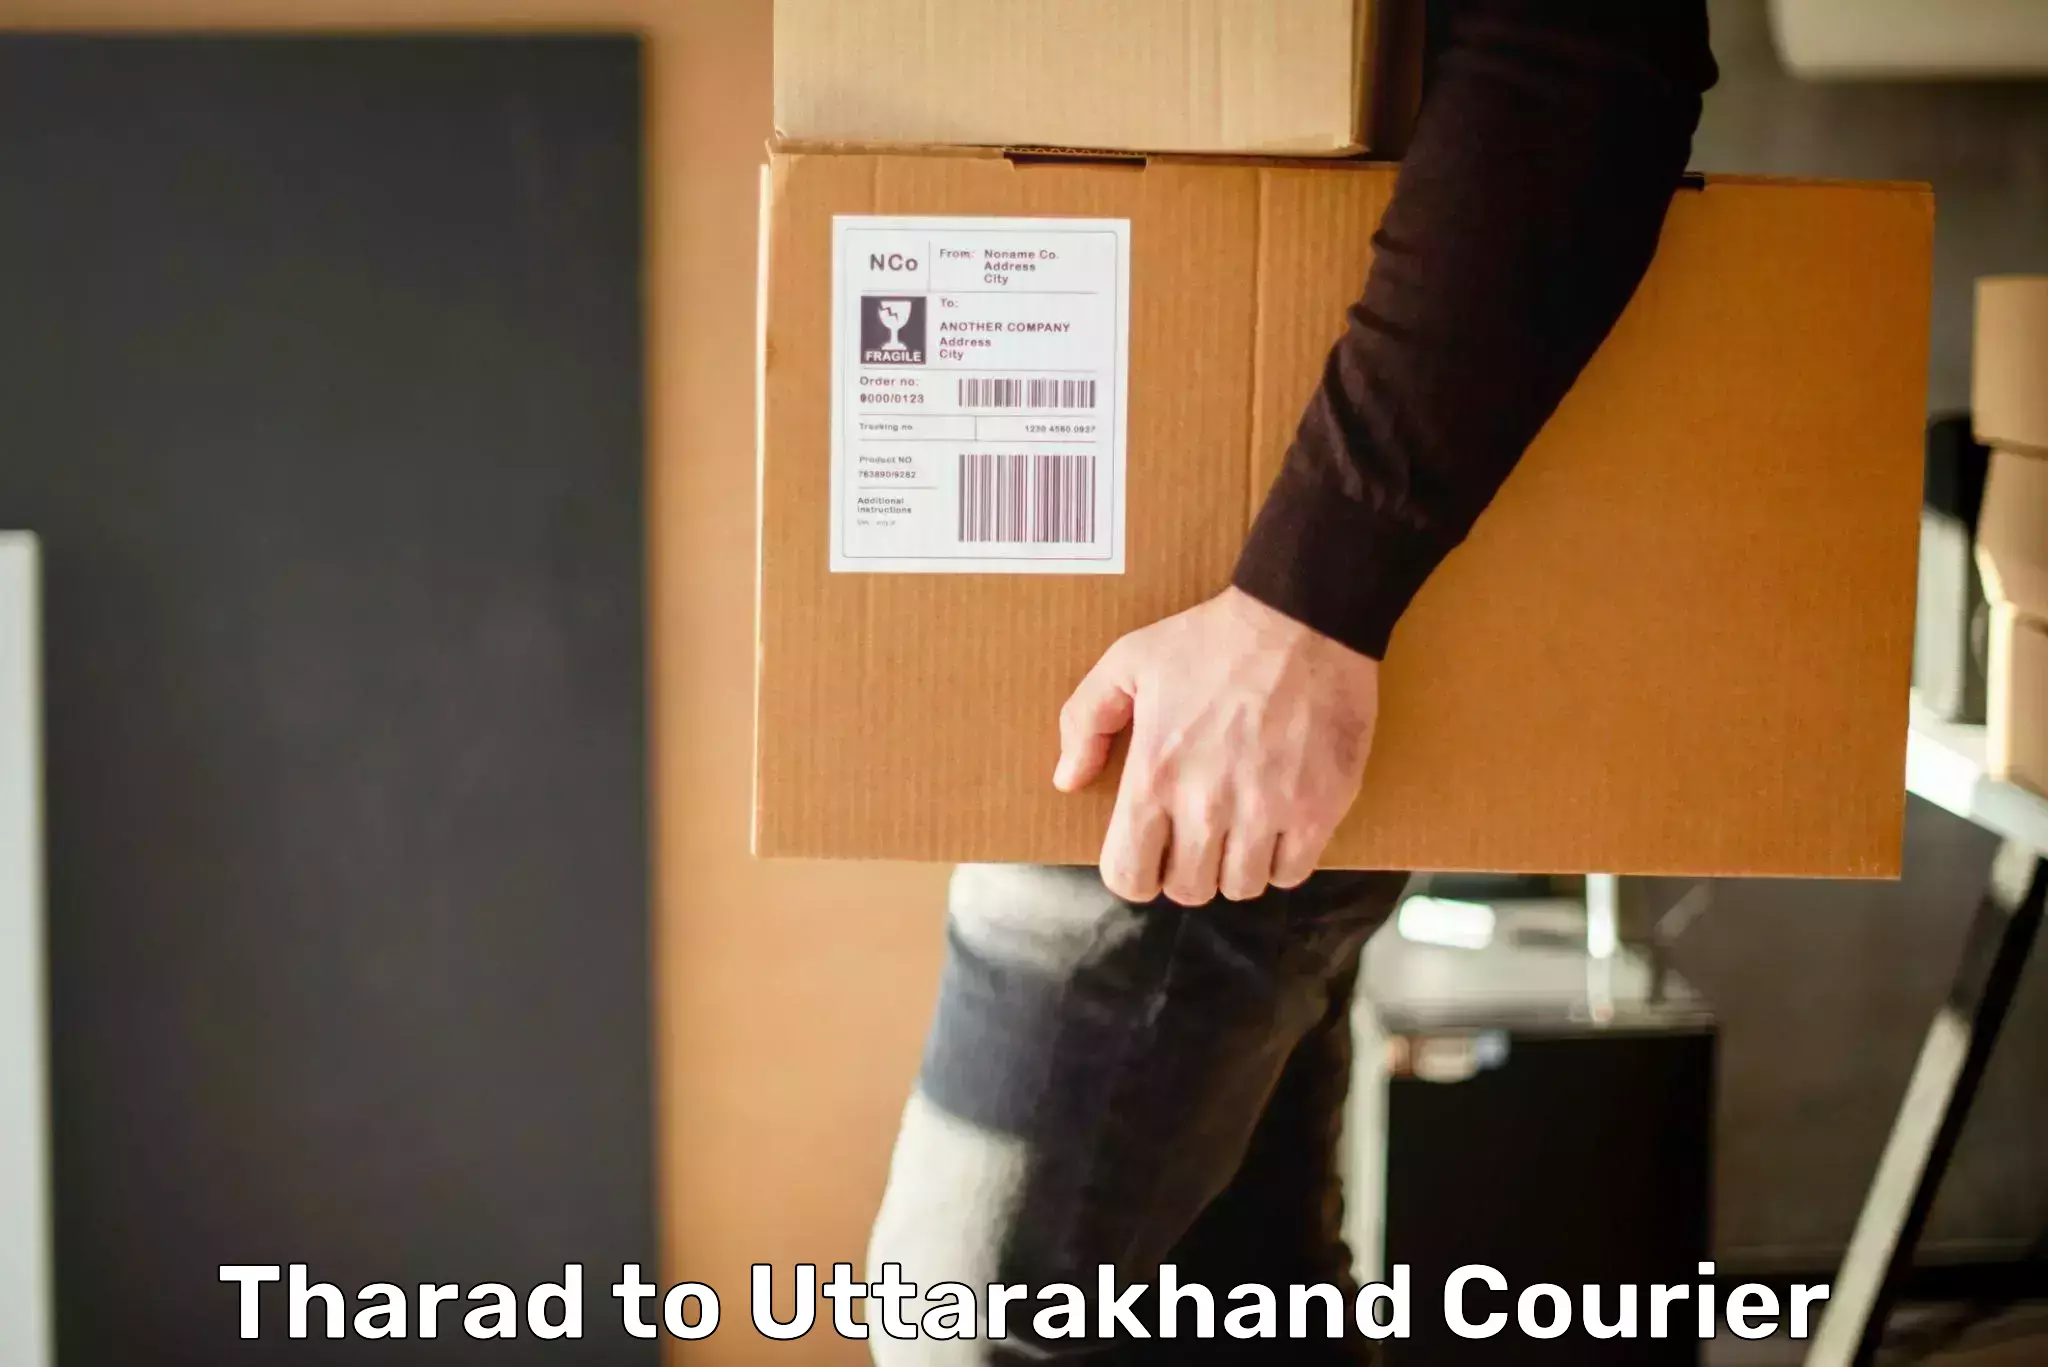 Global shipping networks Tharad to Rudrapur